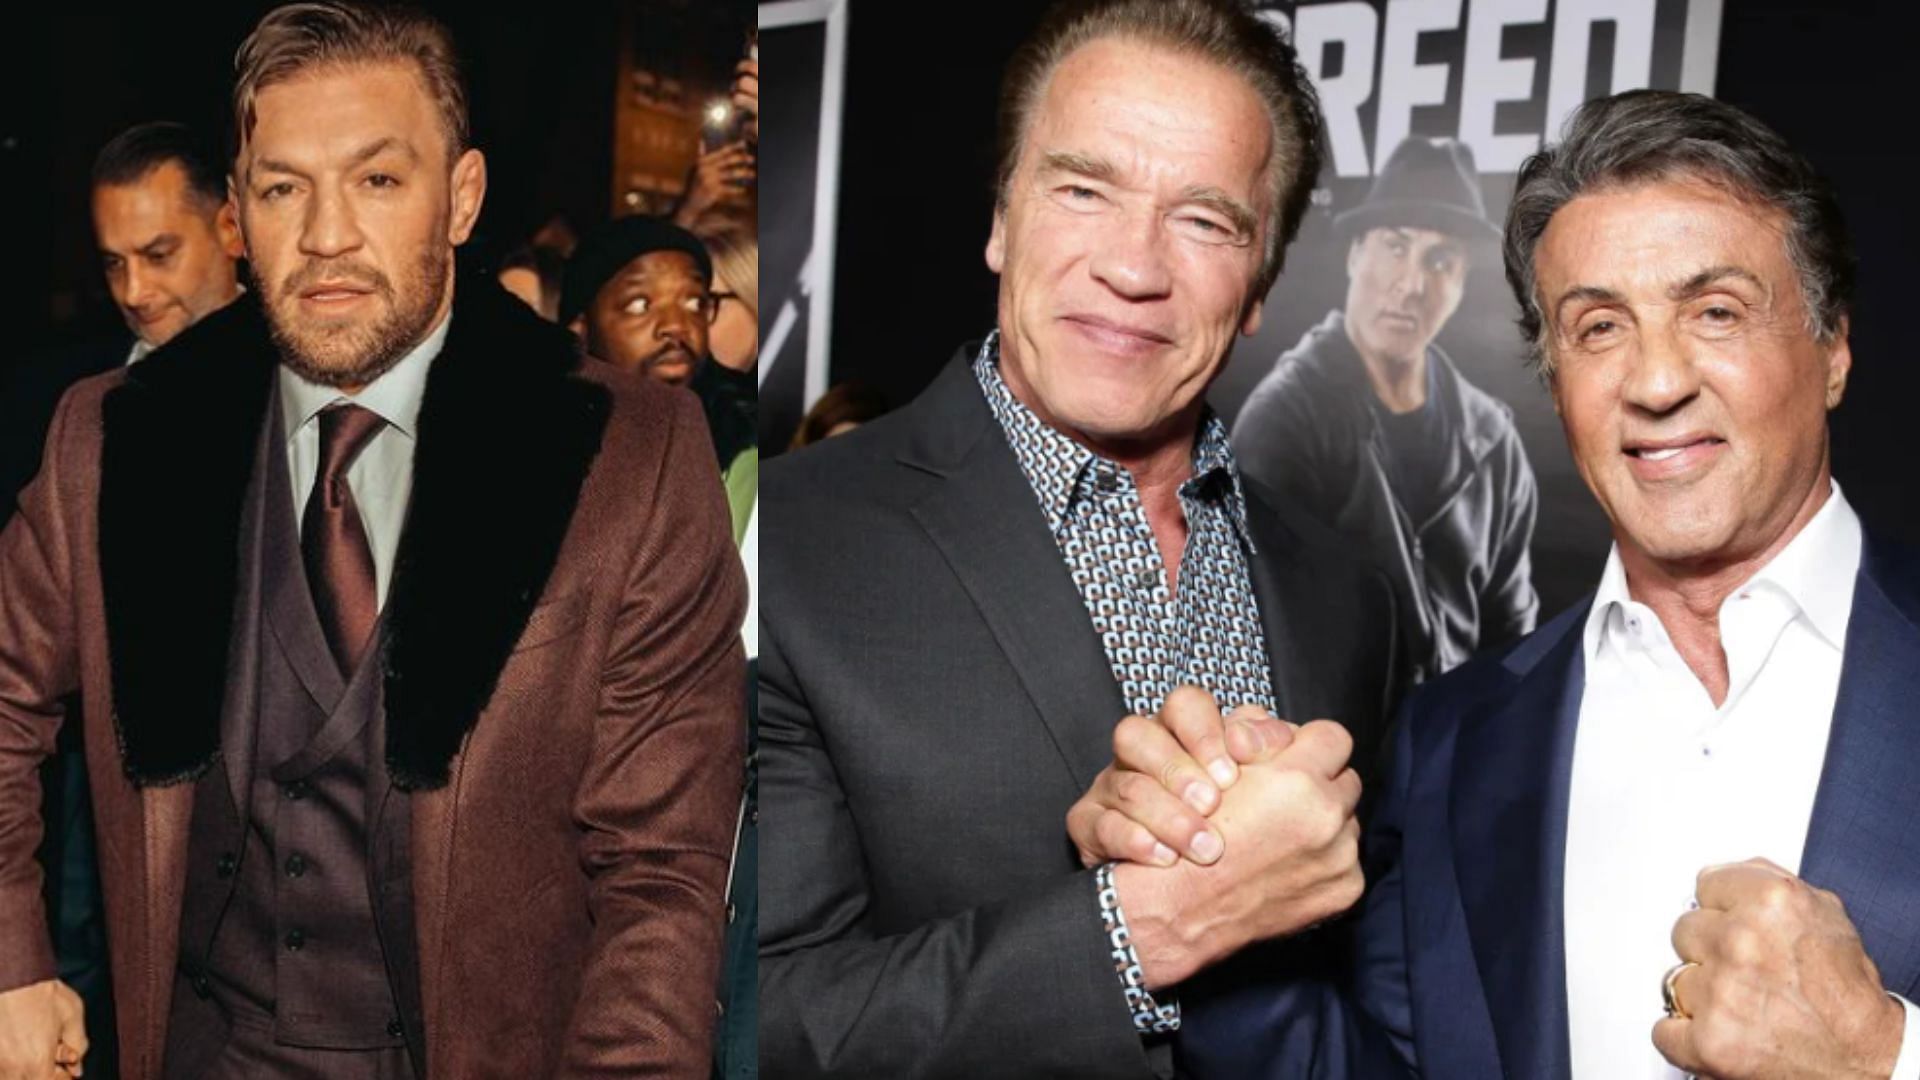 Conor McGregor (left) wants to emulate careers of Arnold Schwarzenegger and Sylvester Stallone (right) [Images courtesy of @thenotoriousmma &amp; @schwarzenegger on Instagram]